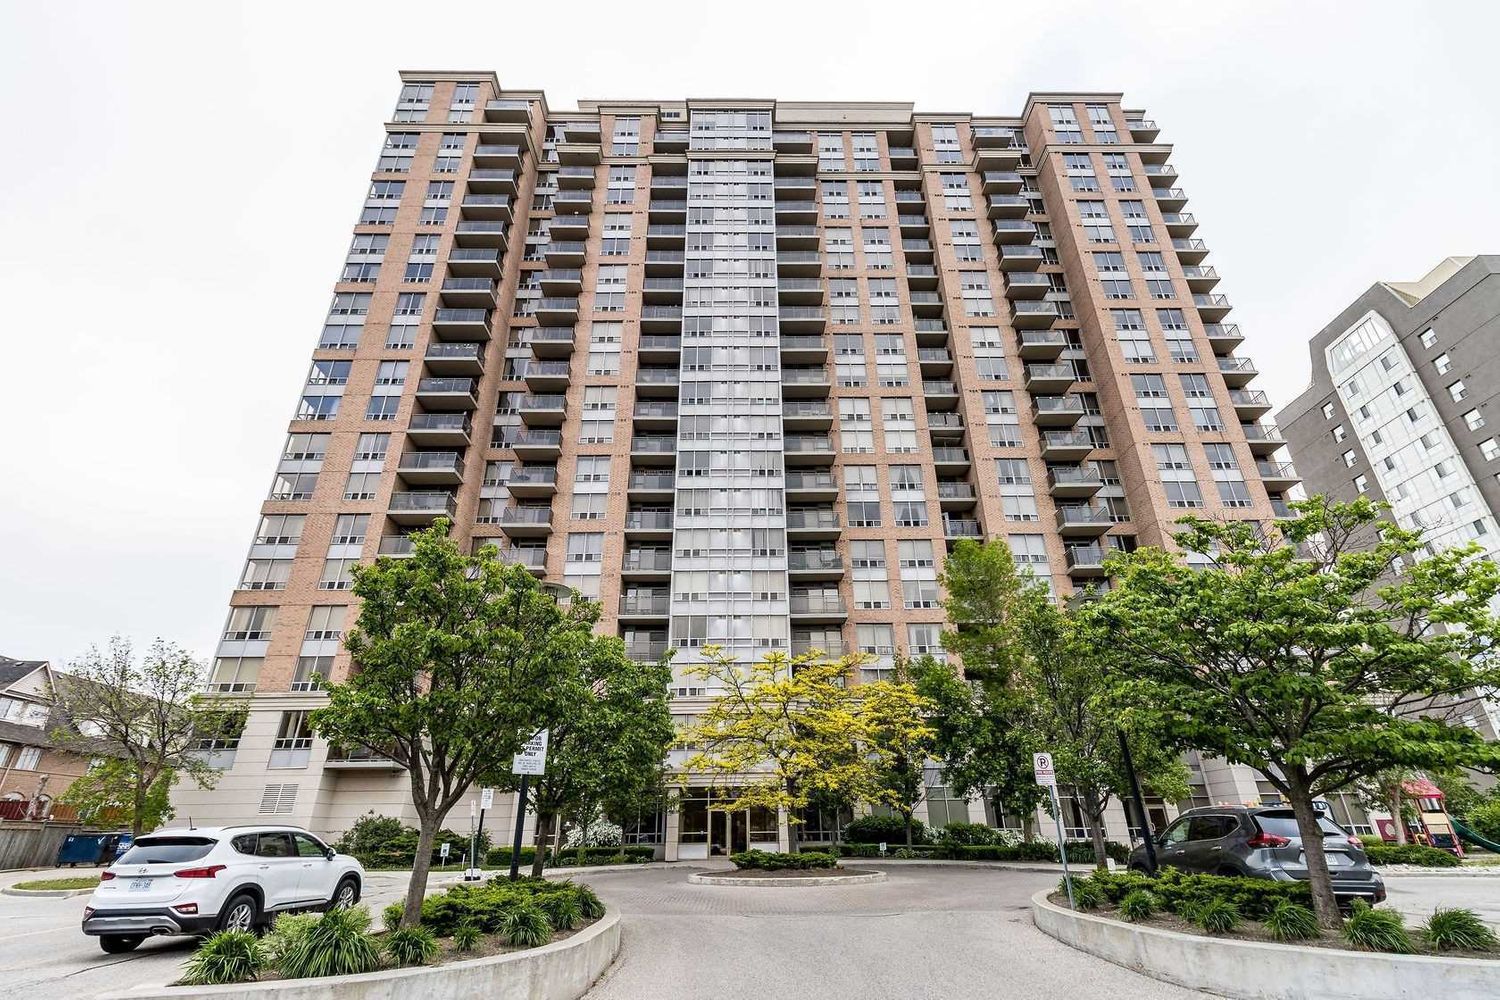 55 Strathaven Drive. The Residences of Strathaven Condos is located in  Mississauga, Toronto - image #1 of 2